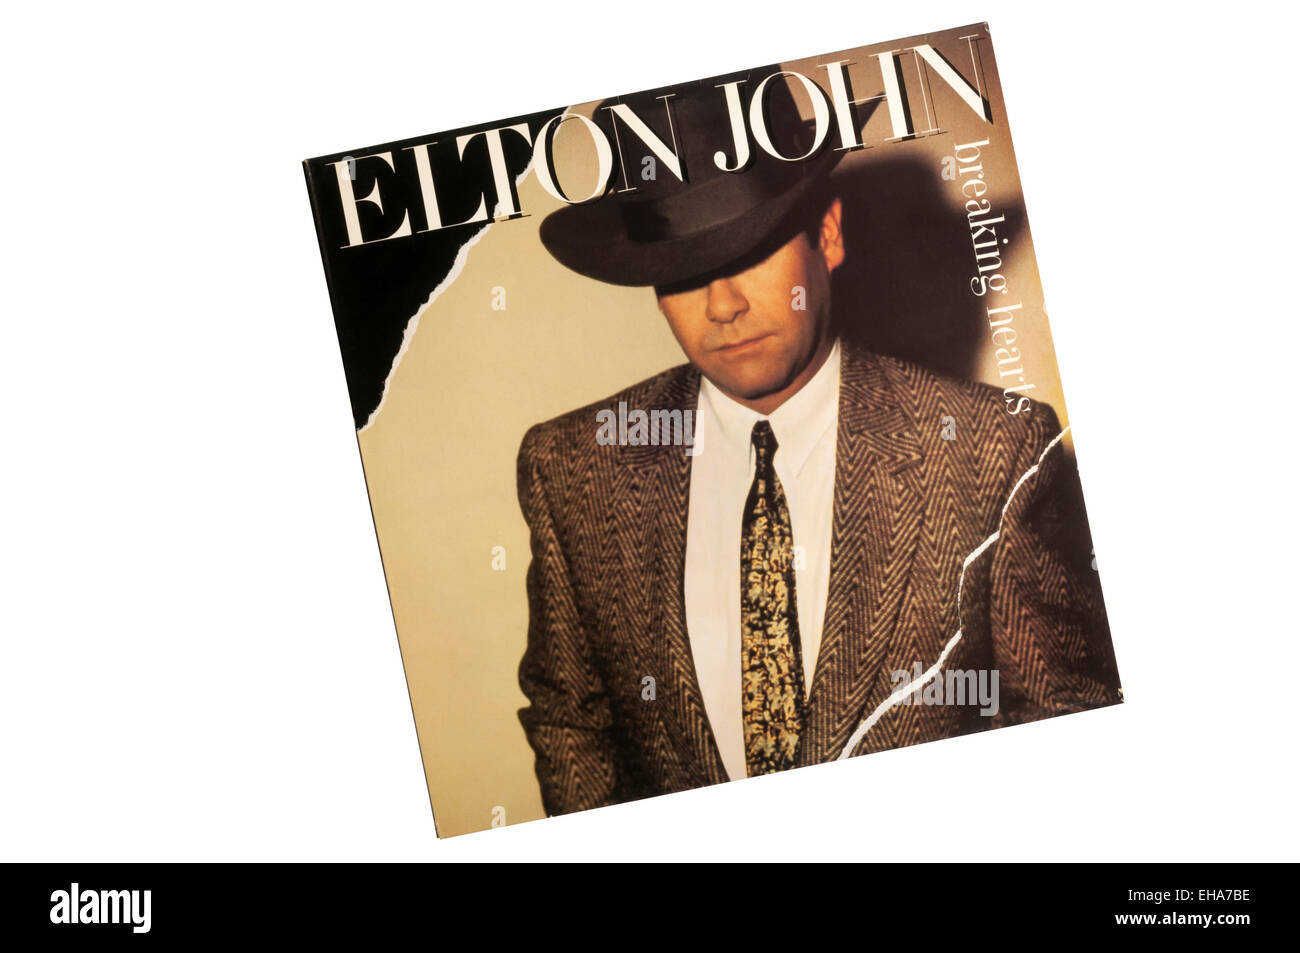 Breaking Hearts was the 18th studio album by British singer/songwriter Elton John. It was released in 1984. Stock Photo